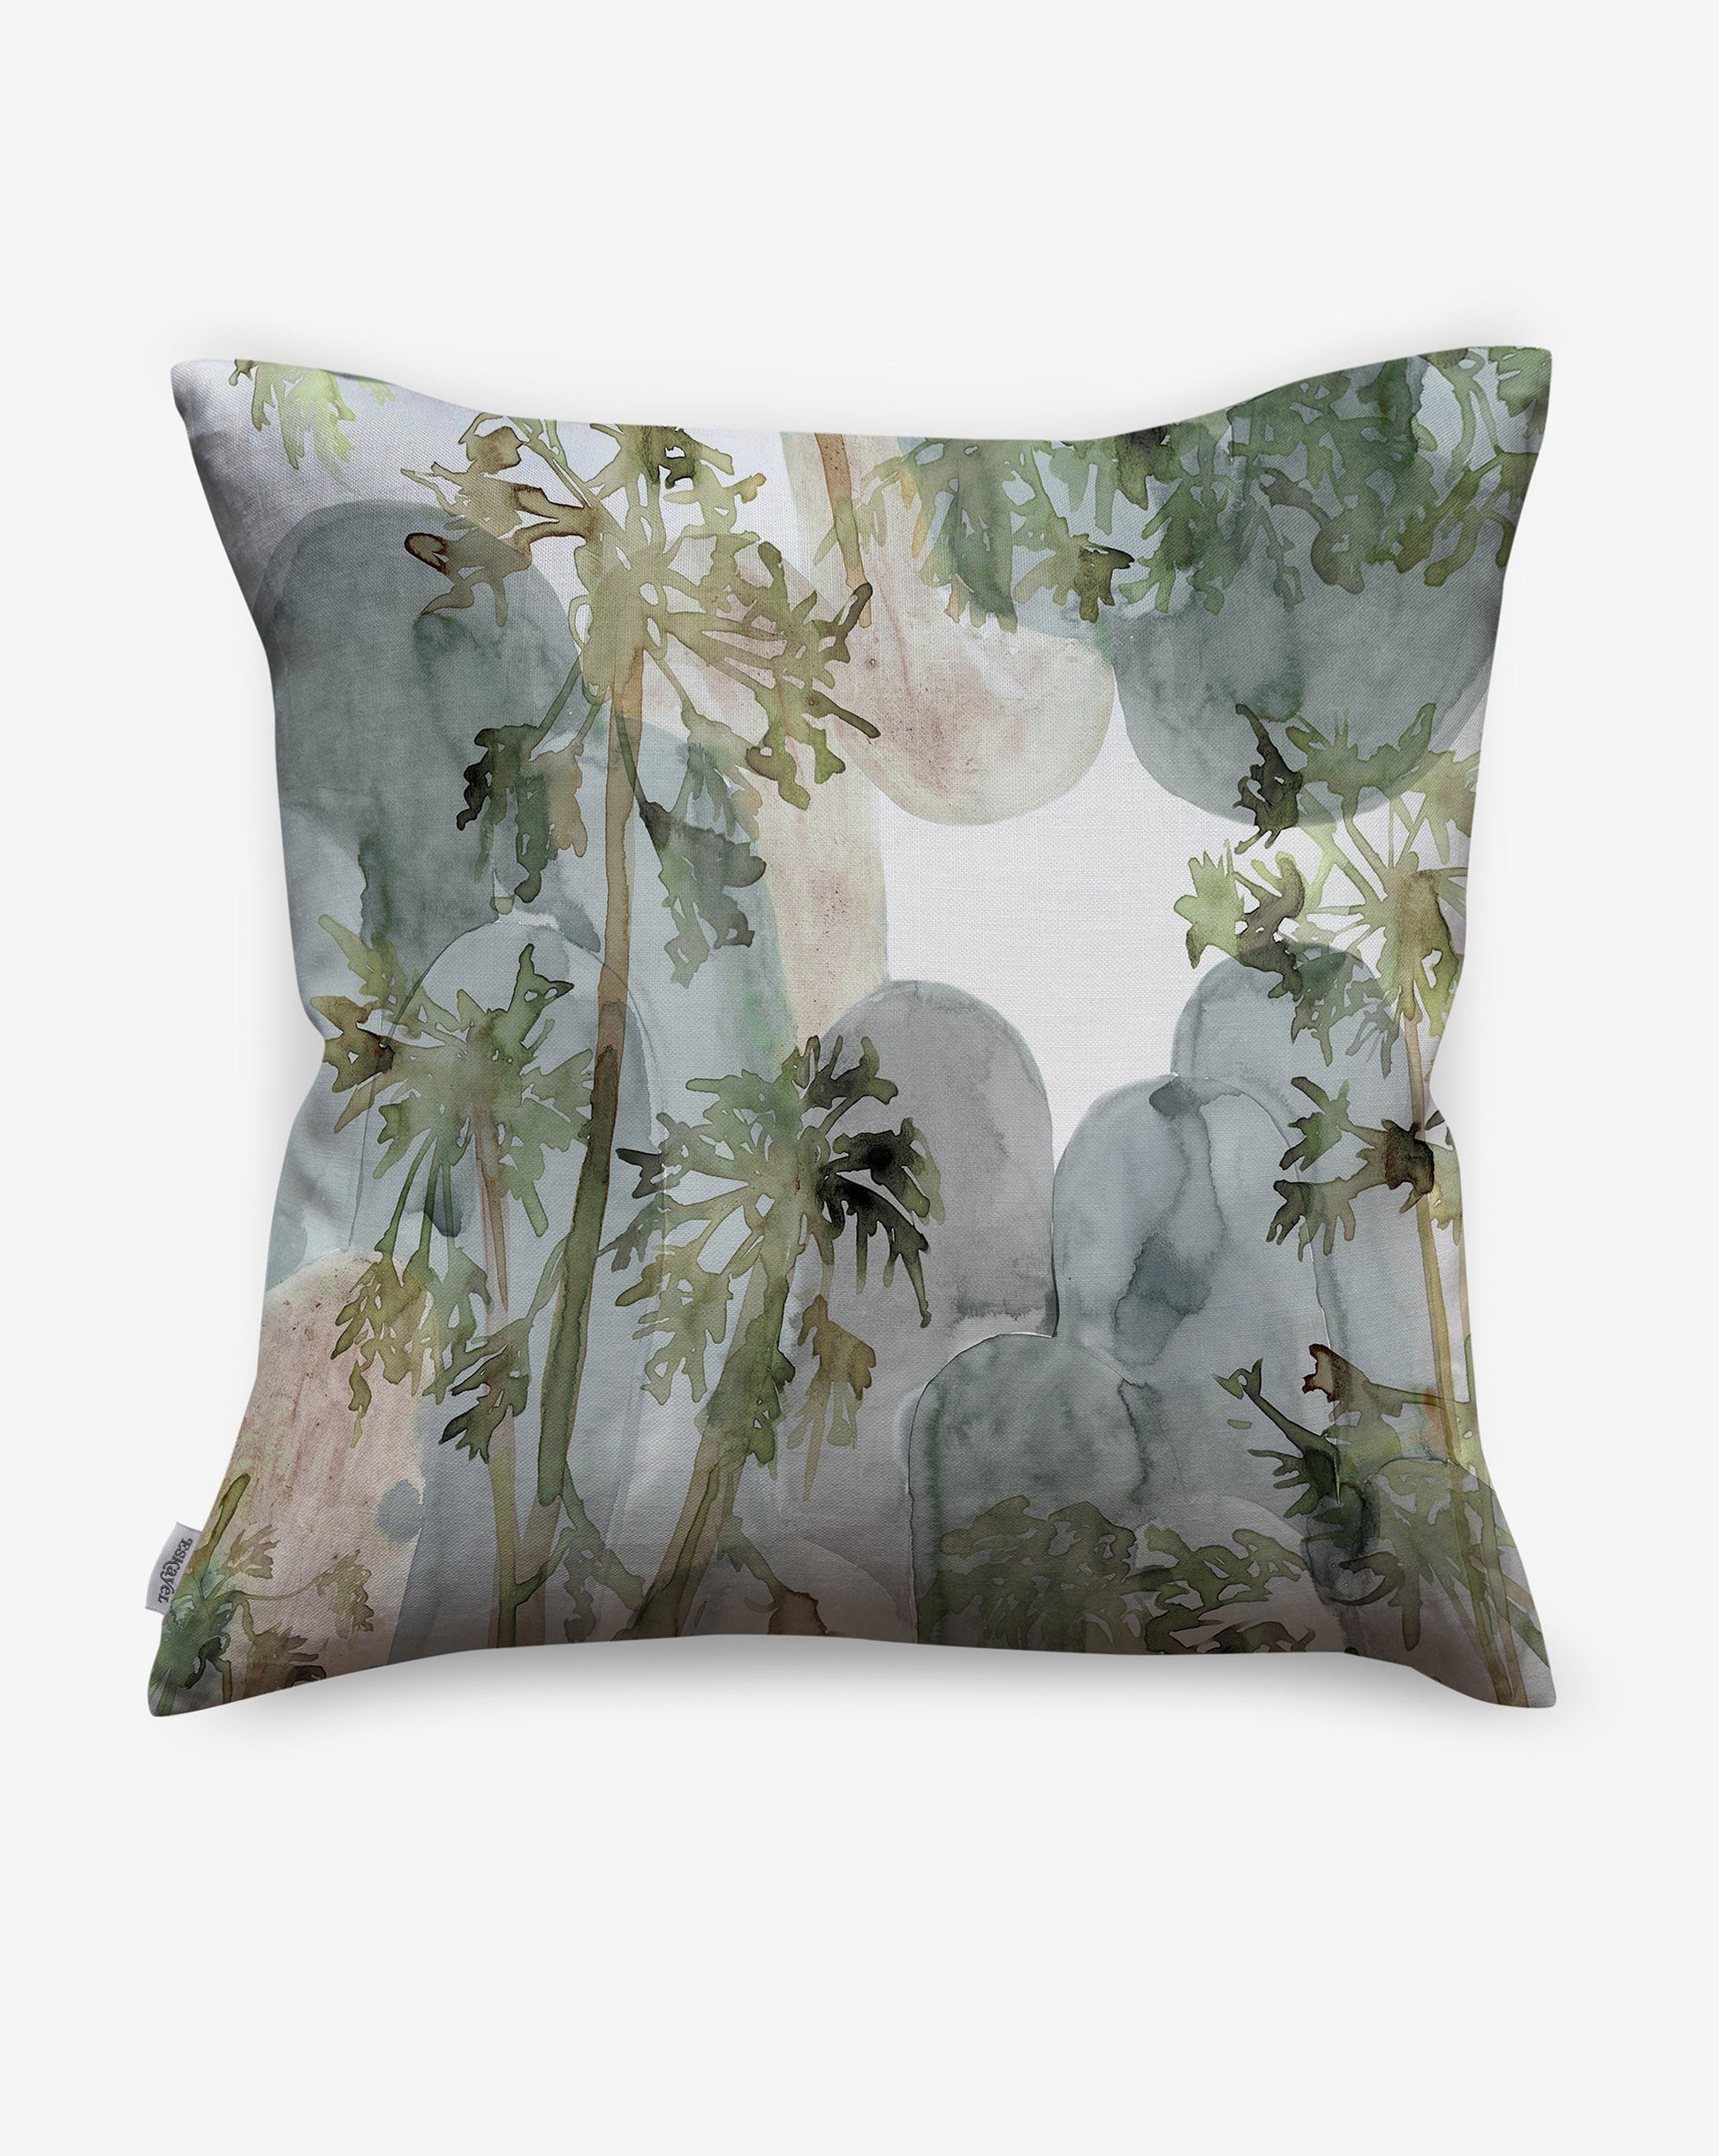 Depicting silhouettes of a tropical tree, luxurious Papaya Arc pillows in our Sage colorway feature greens and greys.   